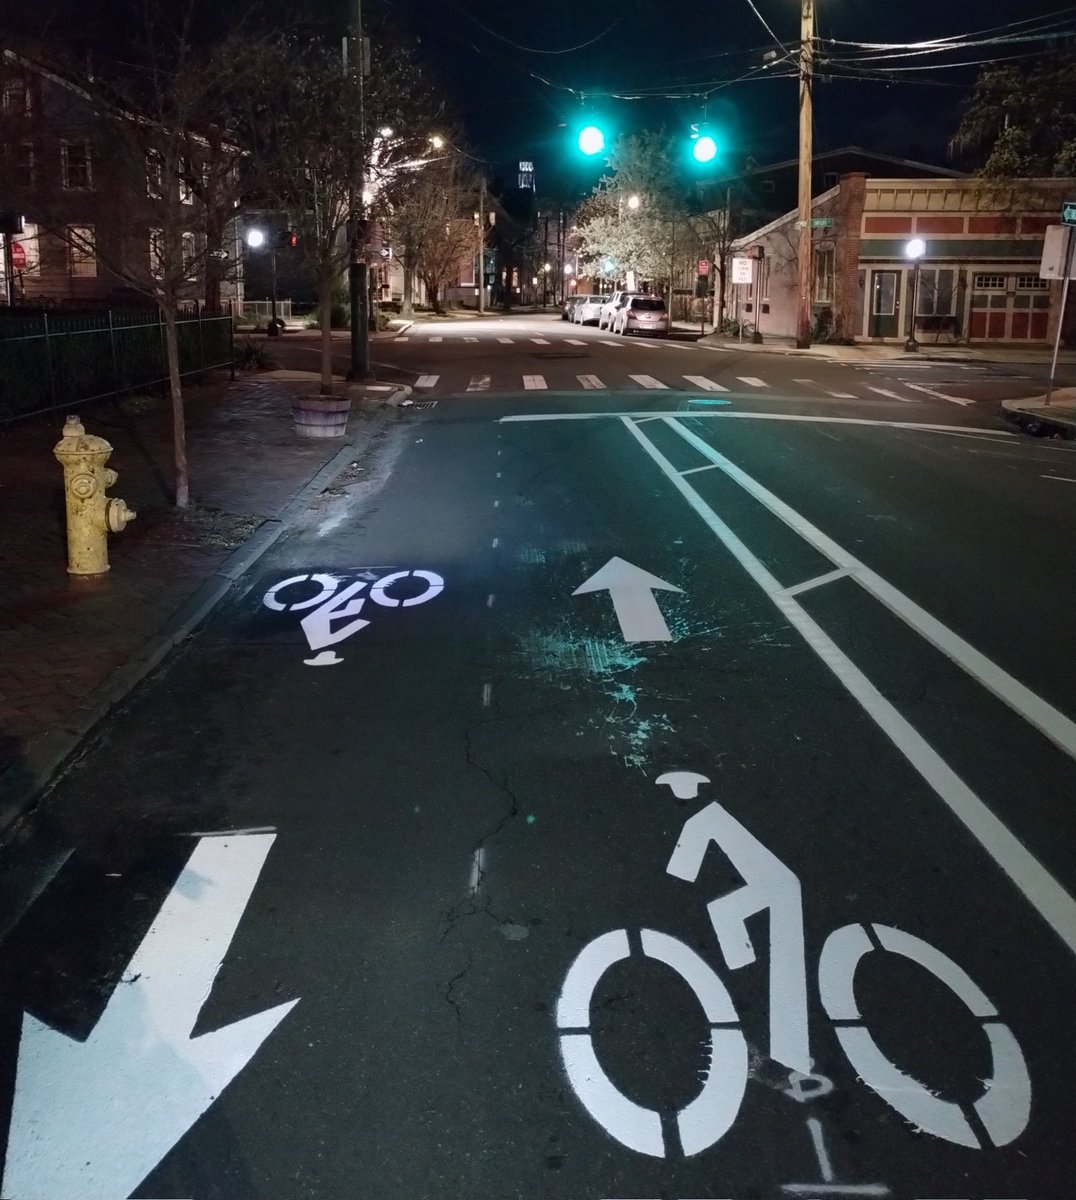 Did they really put down the paint for the rest of the cycletrack?? Two notes:
1. Be still, my heart 
2. This absolutely will not work without a legion of delineators